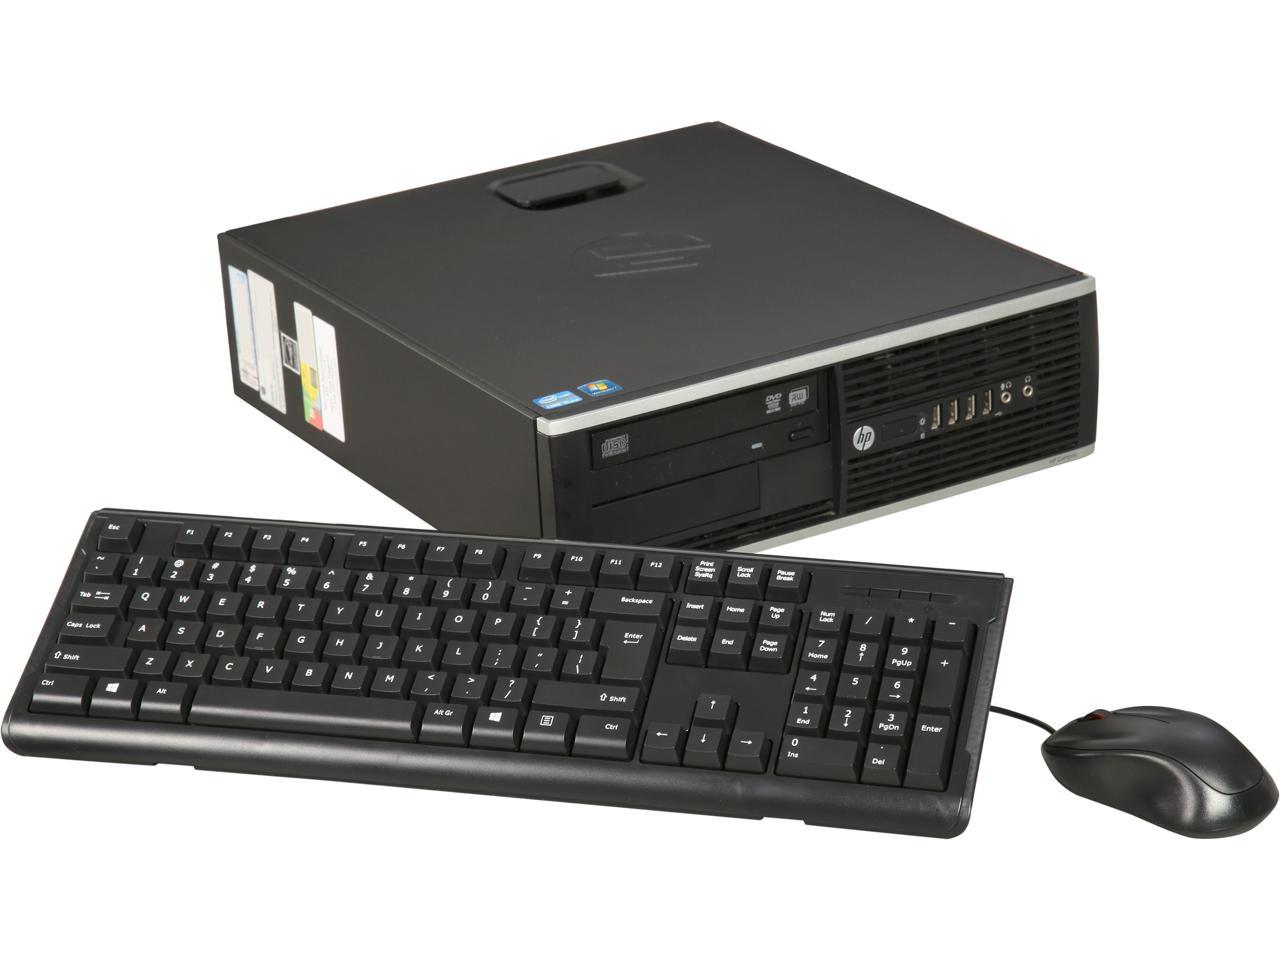 HP Compaq Grade A Small Form Factor Desktop Computer Elite 8300 Intel Core i5 3rd Gen 3470 (3.20 GHz) 8 GB DDR3 500 GB HDD DVD Windows 10 Pro 64-Bit (Keyboard & Mouse Included)